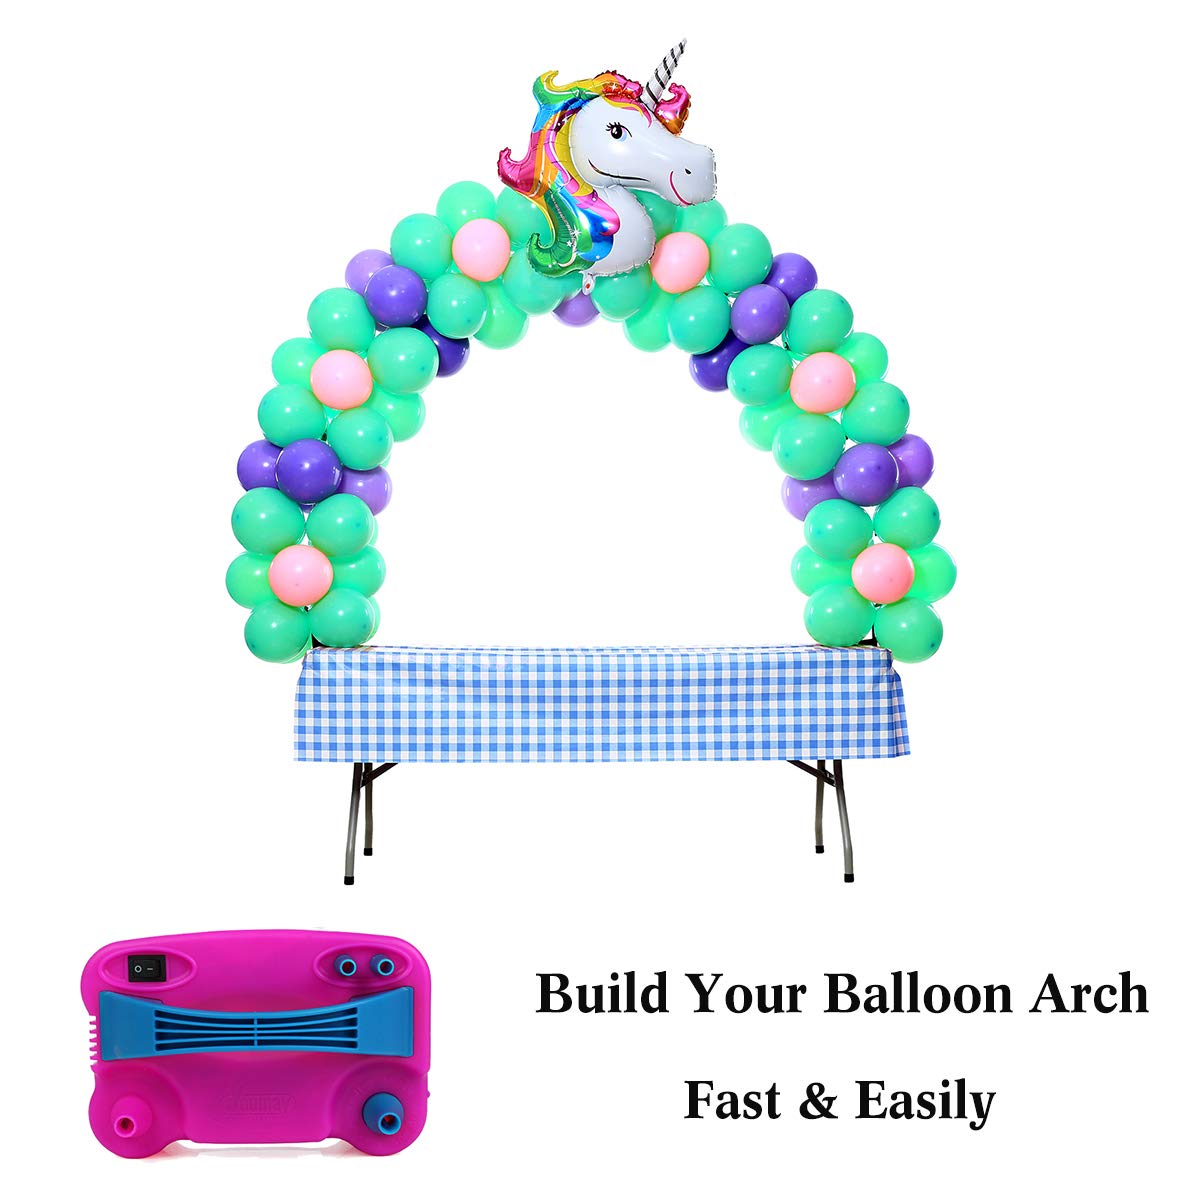 Party Zealot Electric Balloon Inflator with 100 Balloon Ties Air Pump Dual Nozzles Balloons Blower US Standard Plug for Balloon Arch, Balloon Column Stand, and Balloon Decoration